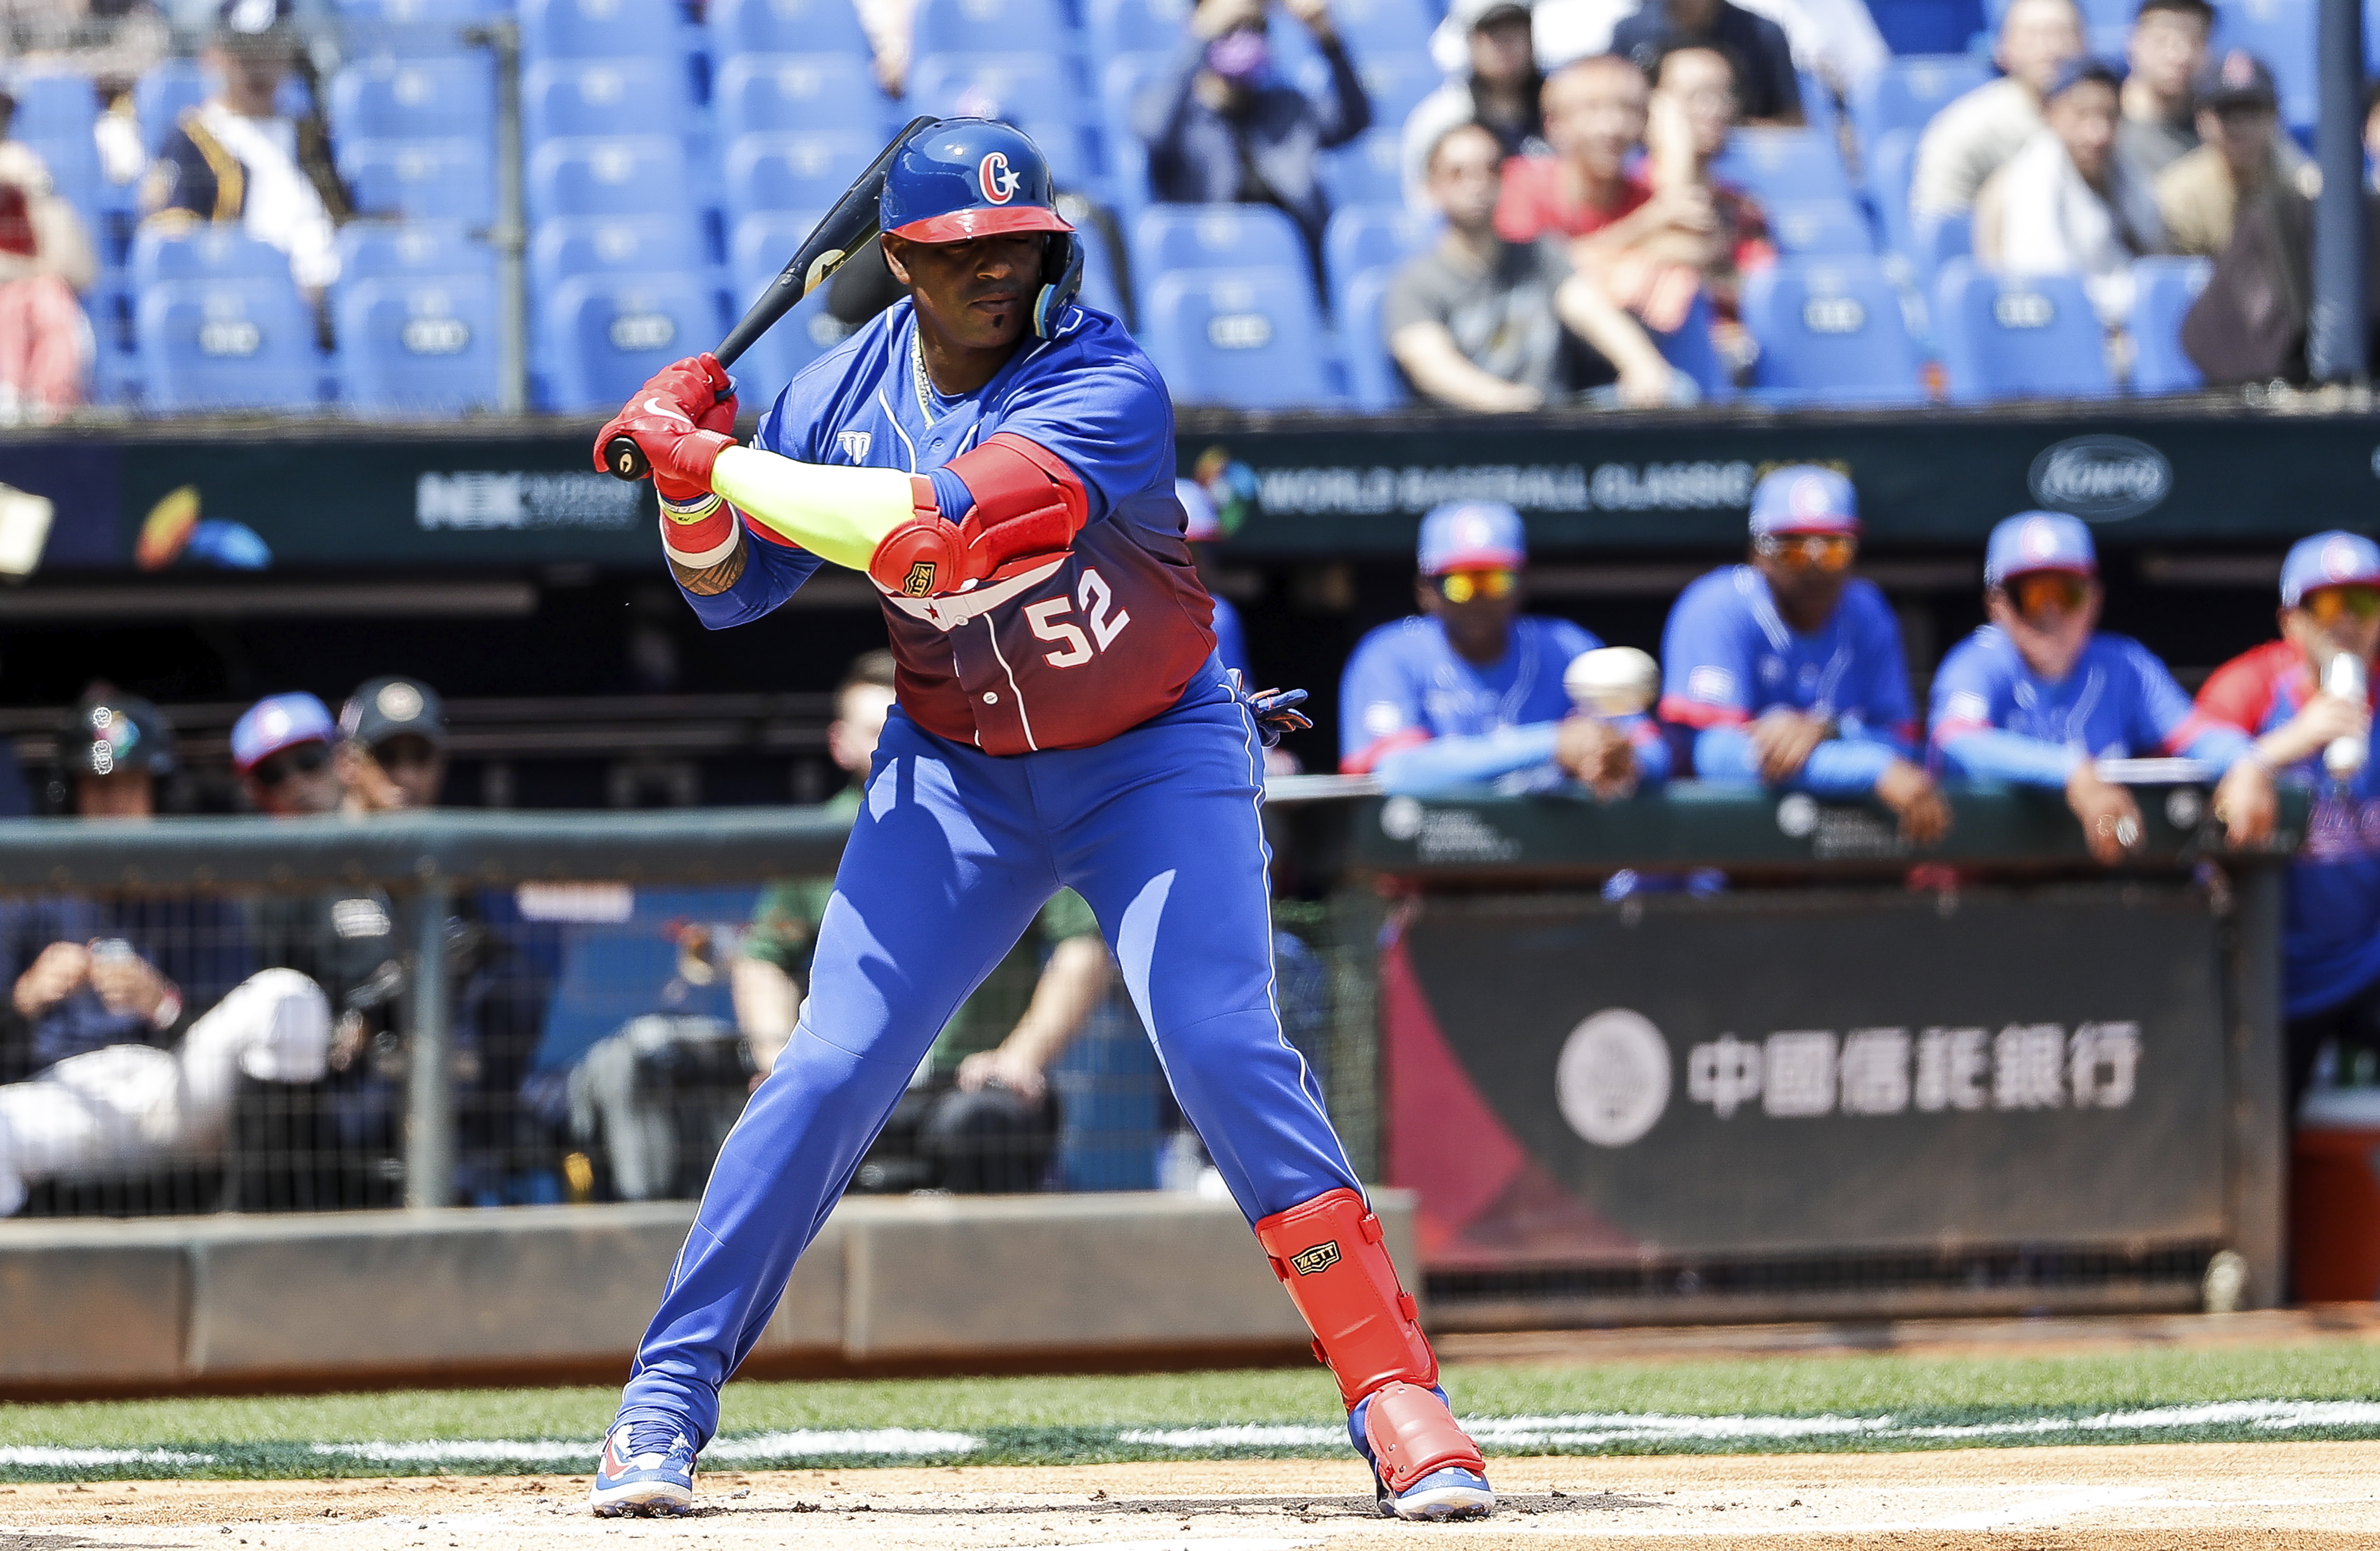 Cuban baseball player Yoenis Cespedes scores a hit during a group A game against the Netherlands during the World Baseball Classic at Taichung Intercontinental Stadium in Taichung, Taiwan, Wednesday, March 8, 2023. (AP Photo/I-Hwa Cheng)